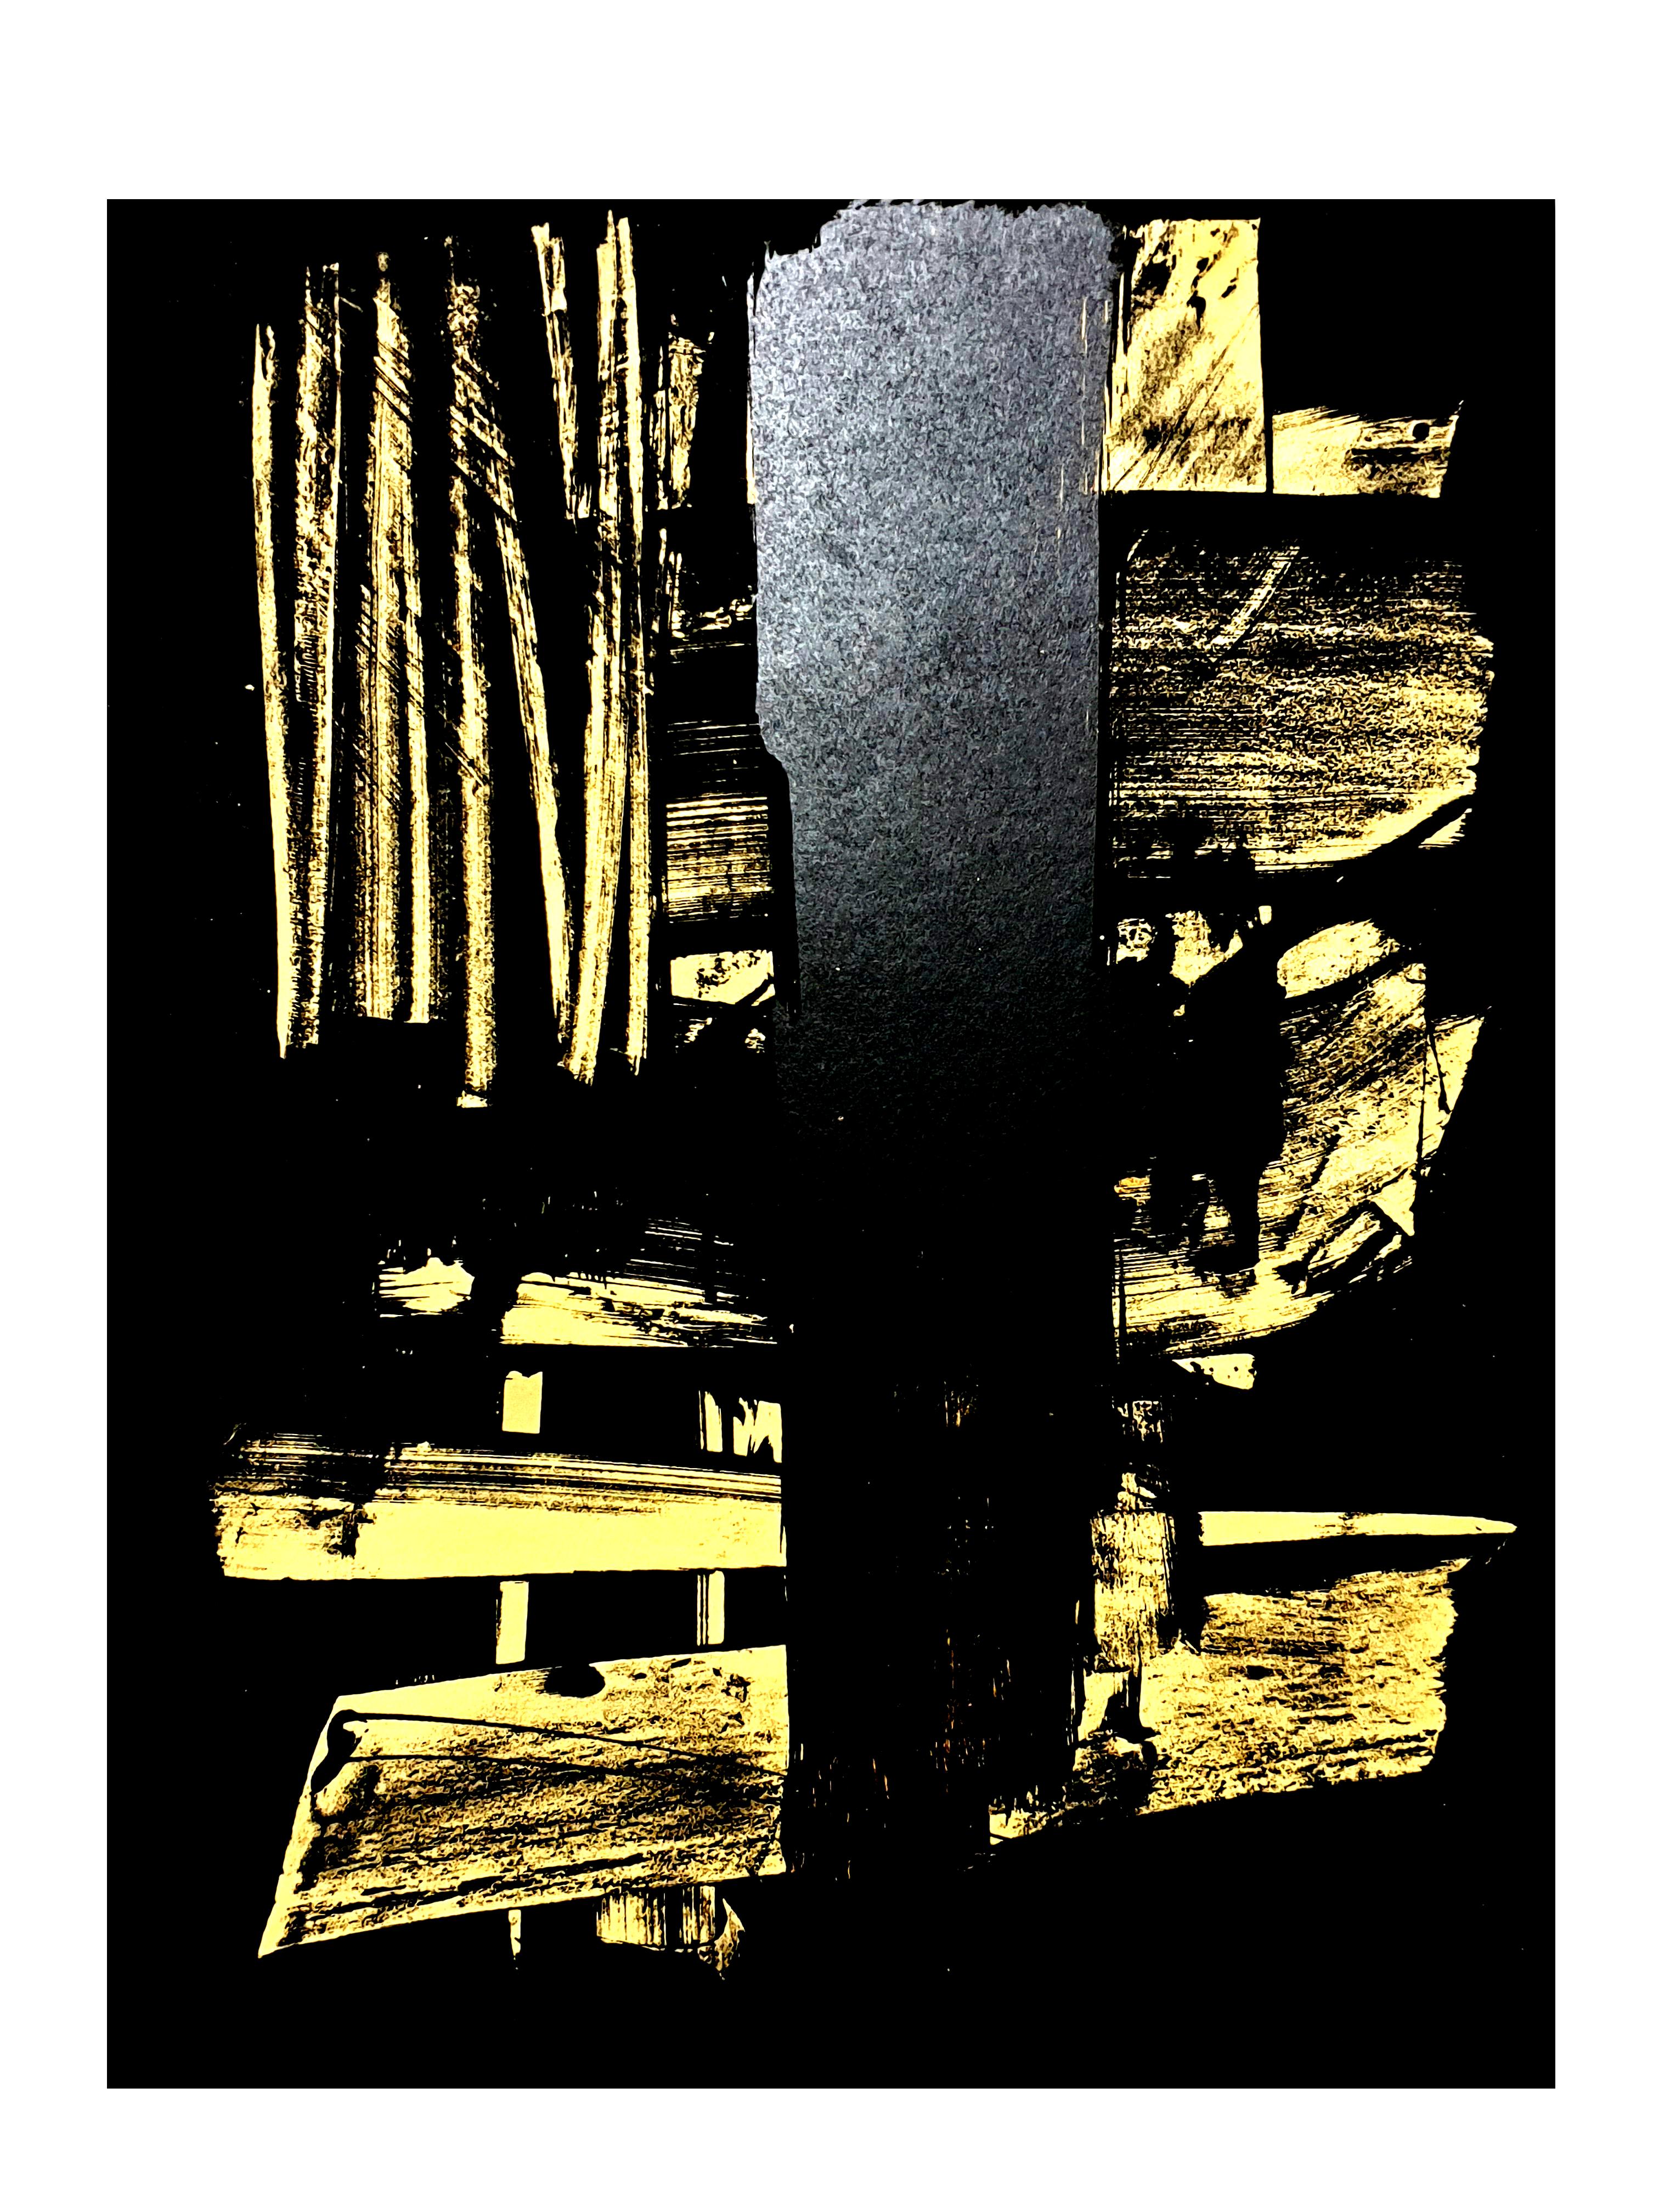 Pierre Soulages - Original Lithograph
Published in the deluxe art review "XXe siècle"
1959
Dimensions: 32 x 24 cm
Unsigned and unumbered as issued